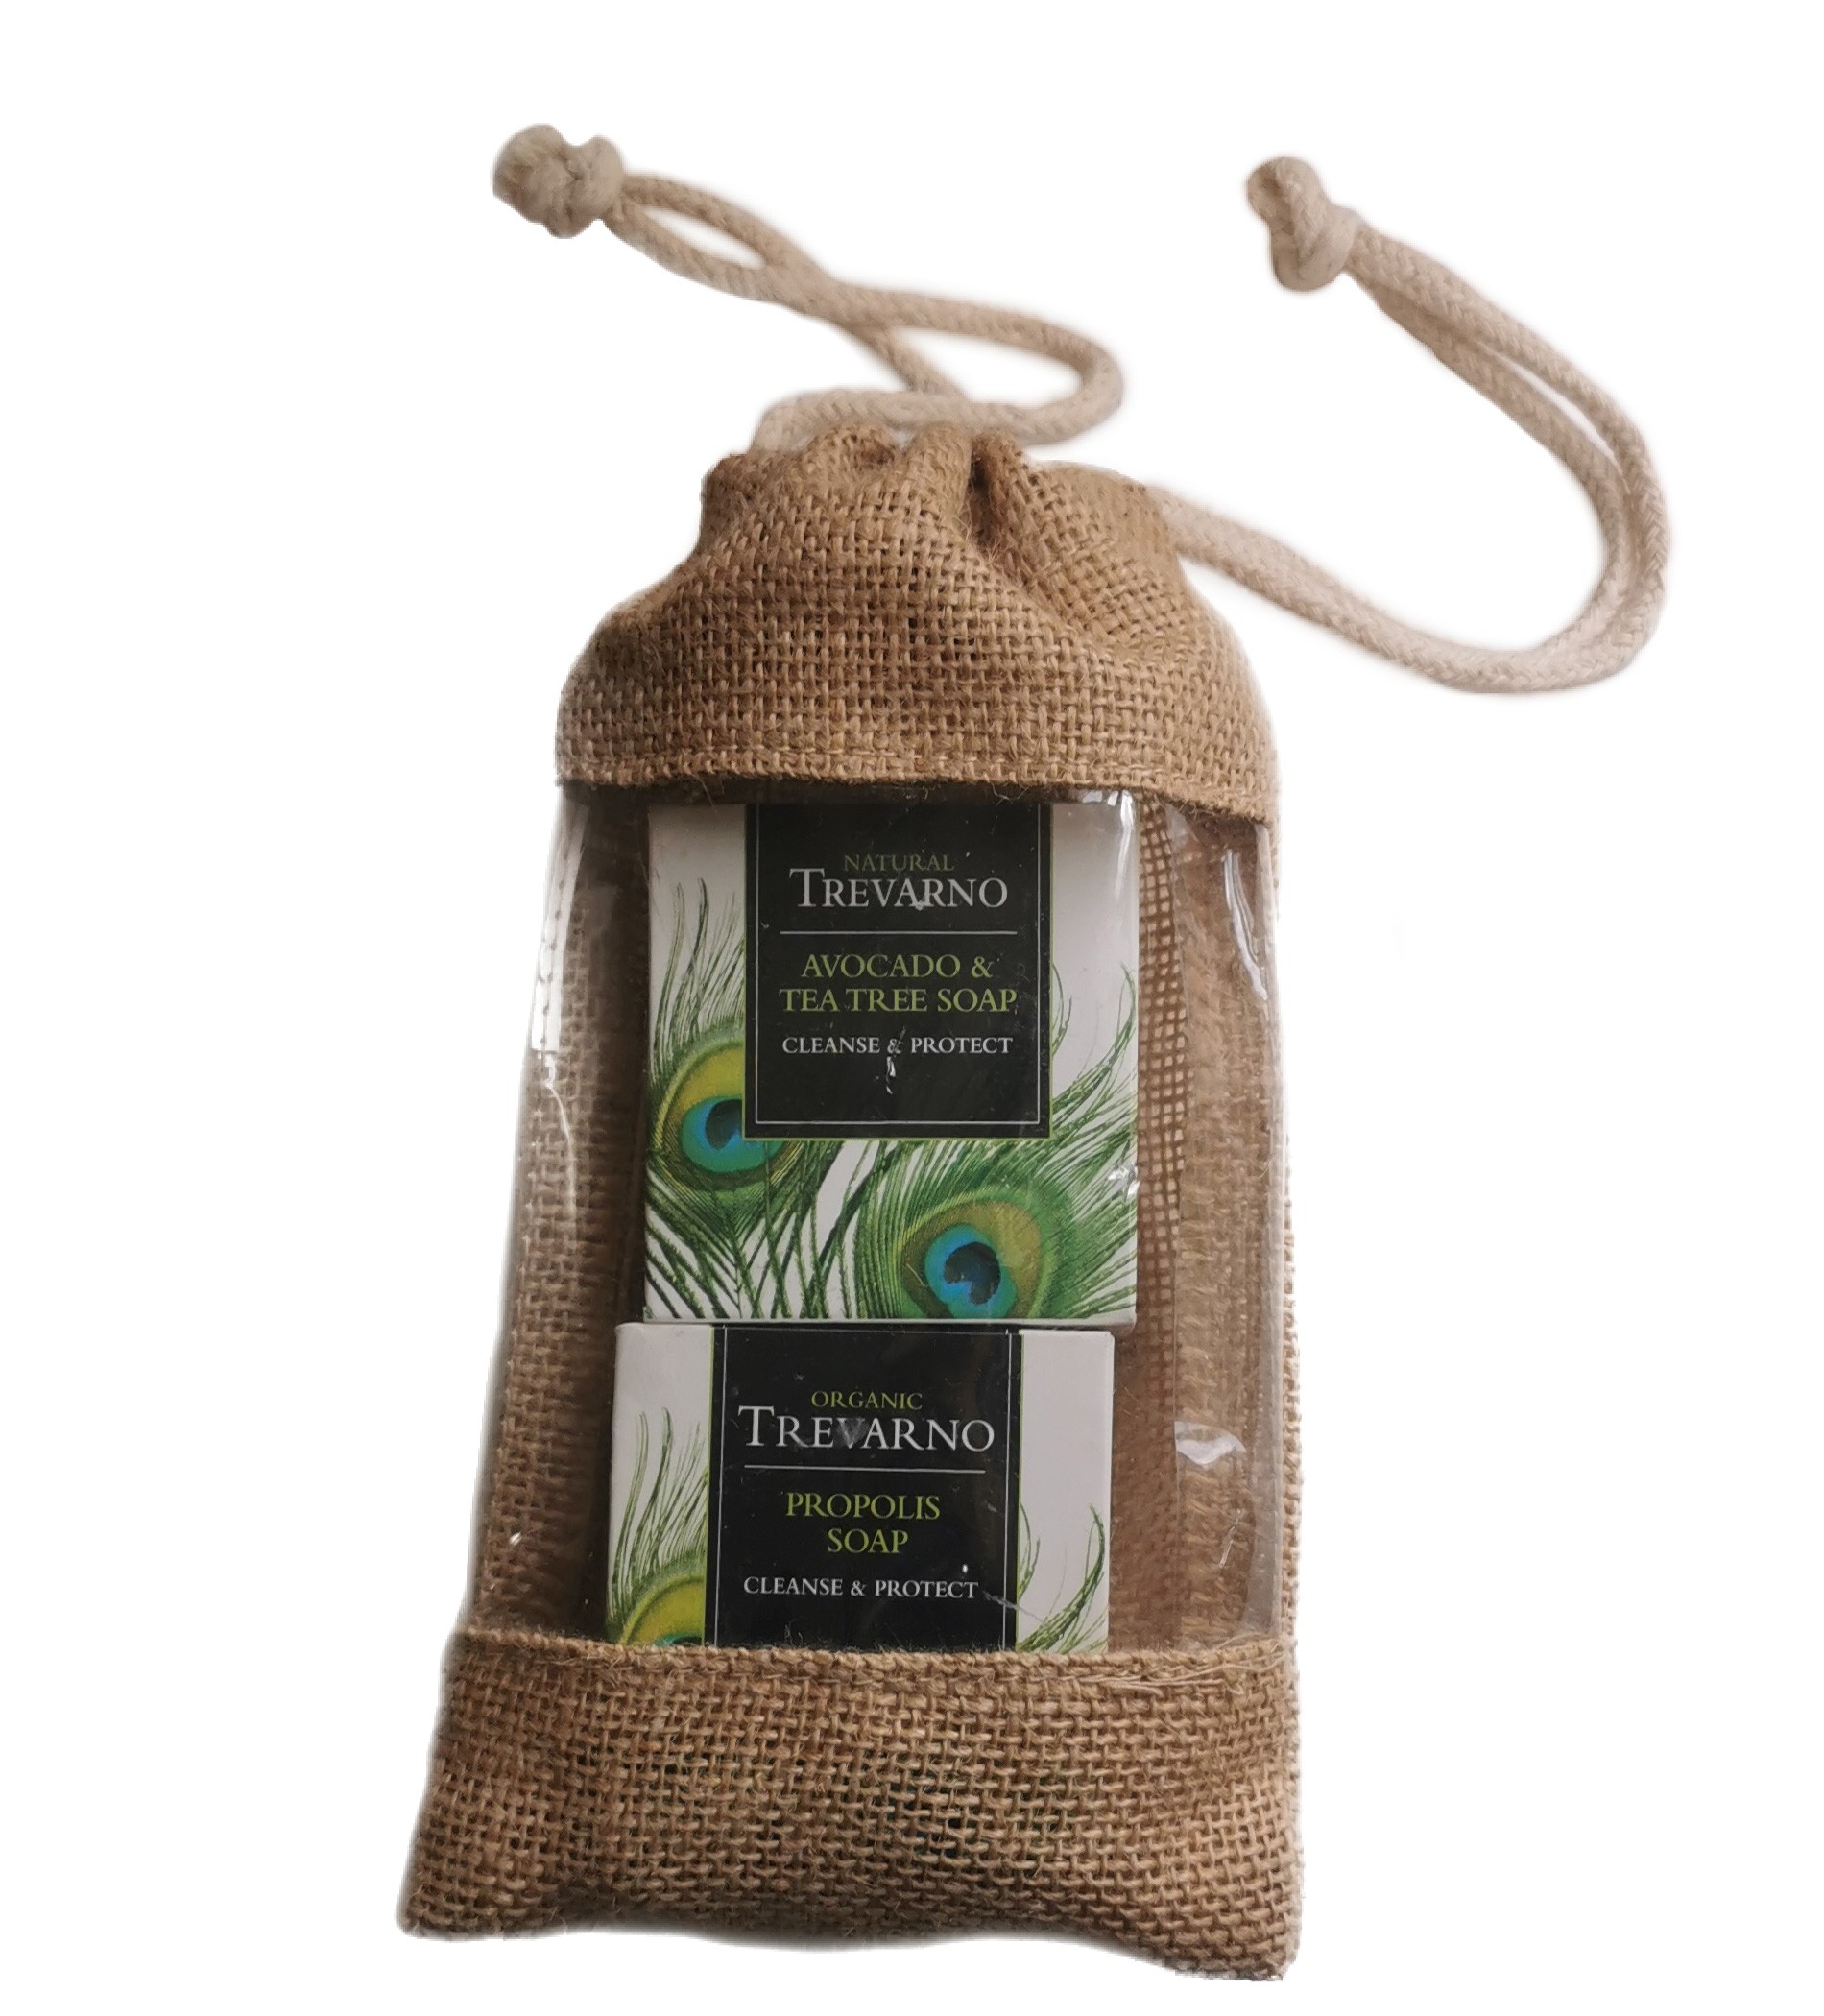 Trevarno Cleanse & Protect Soap Gift Set